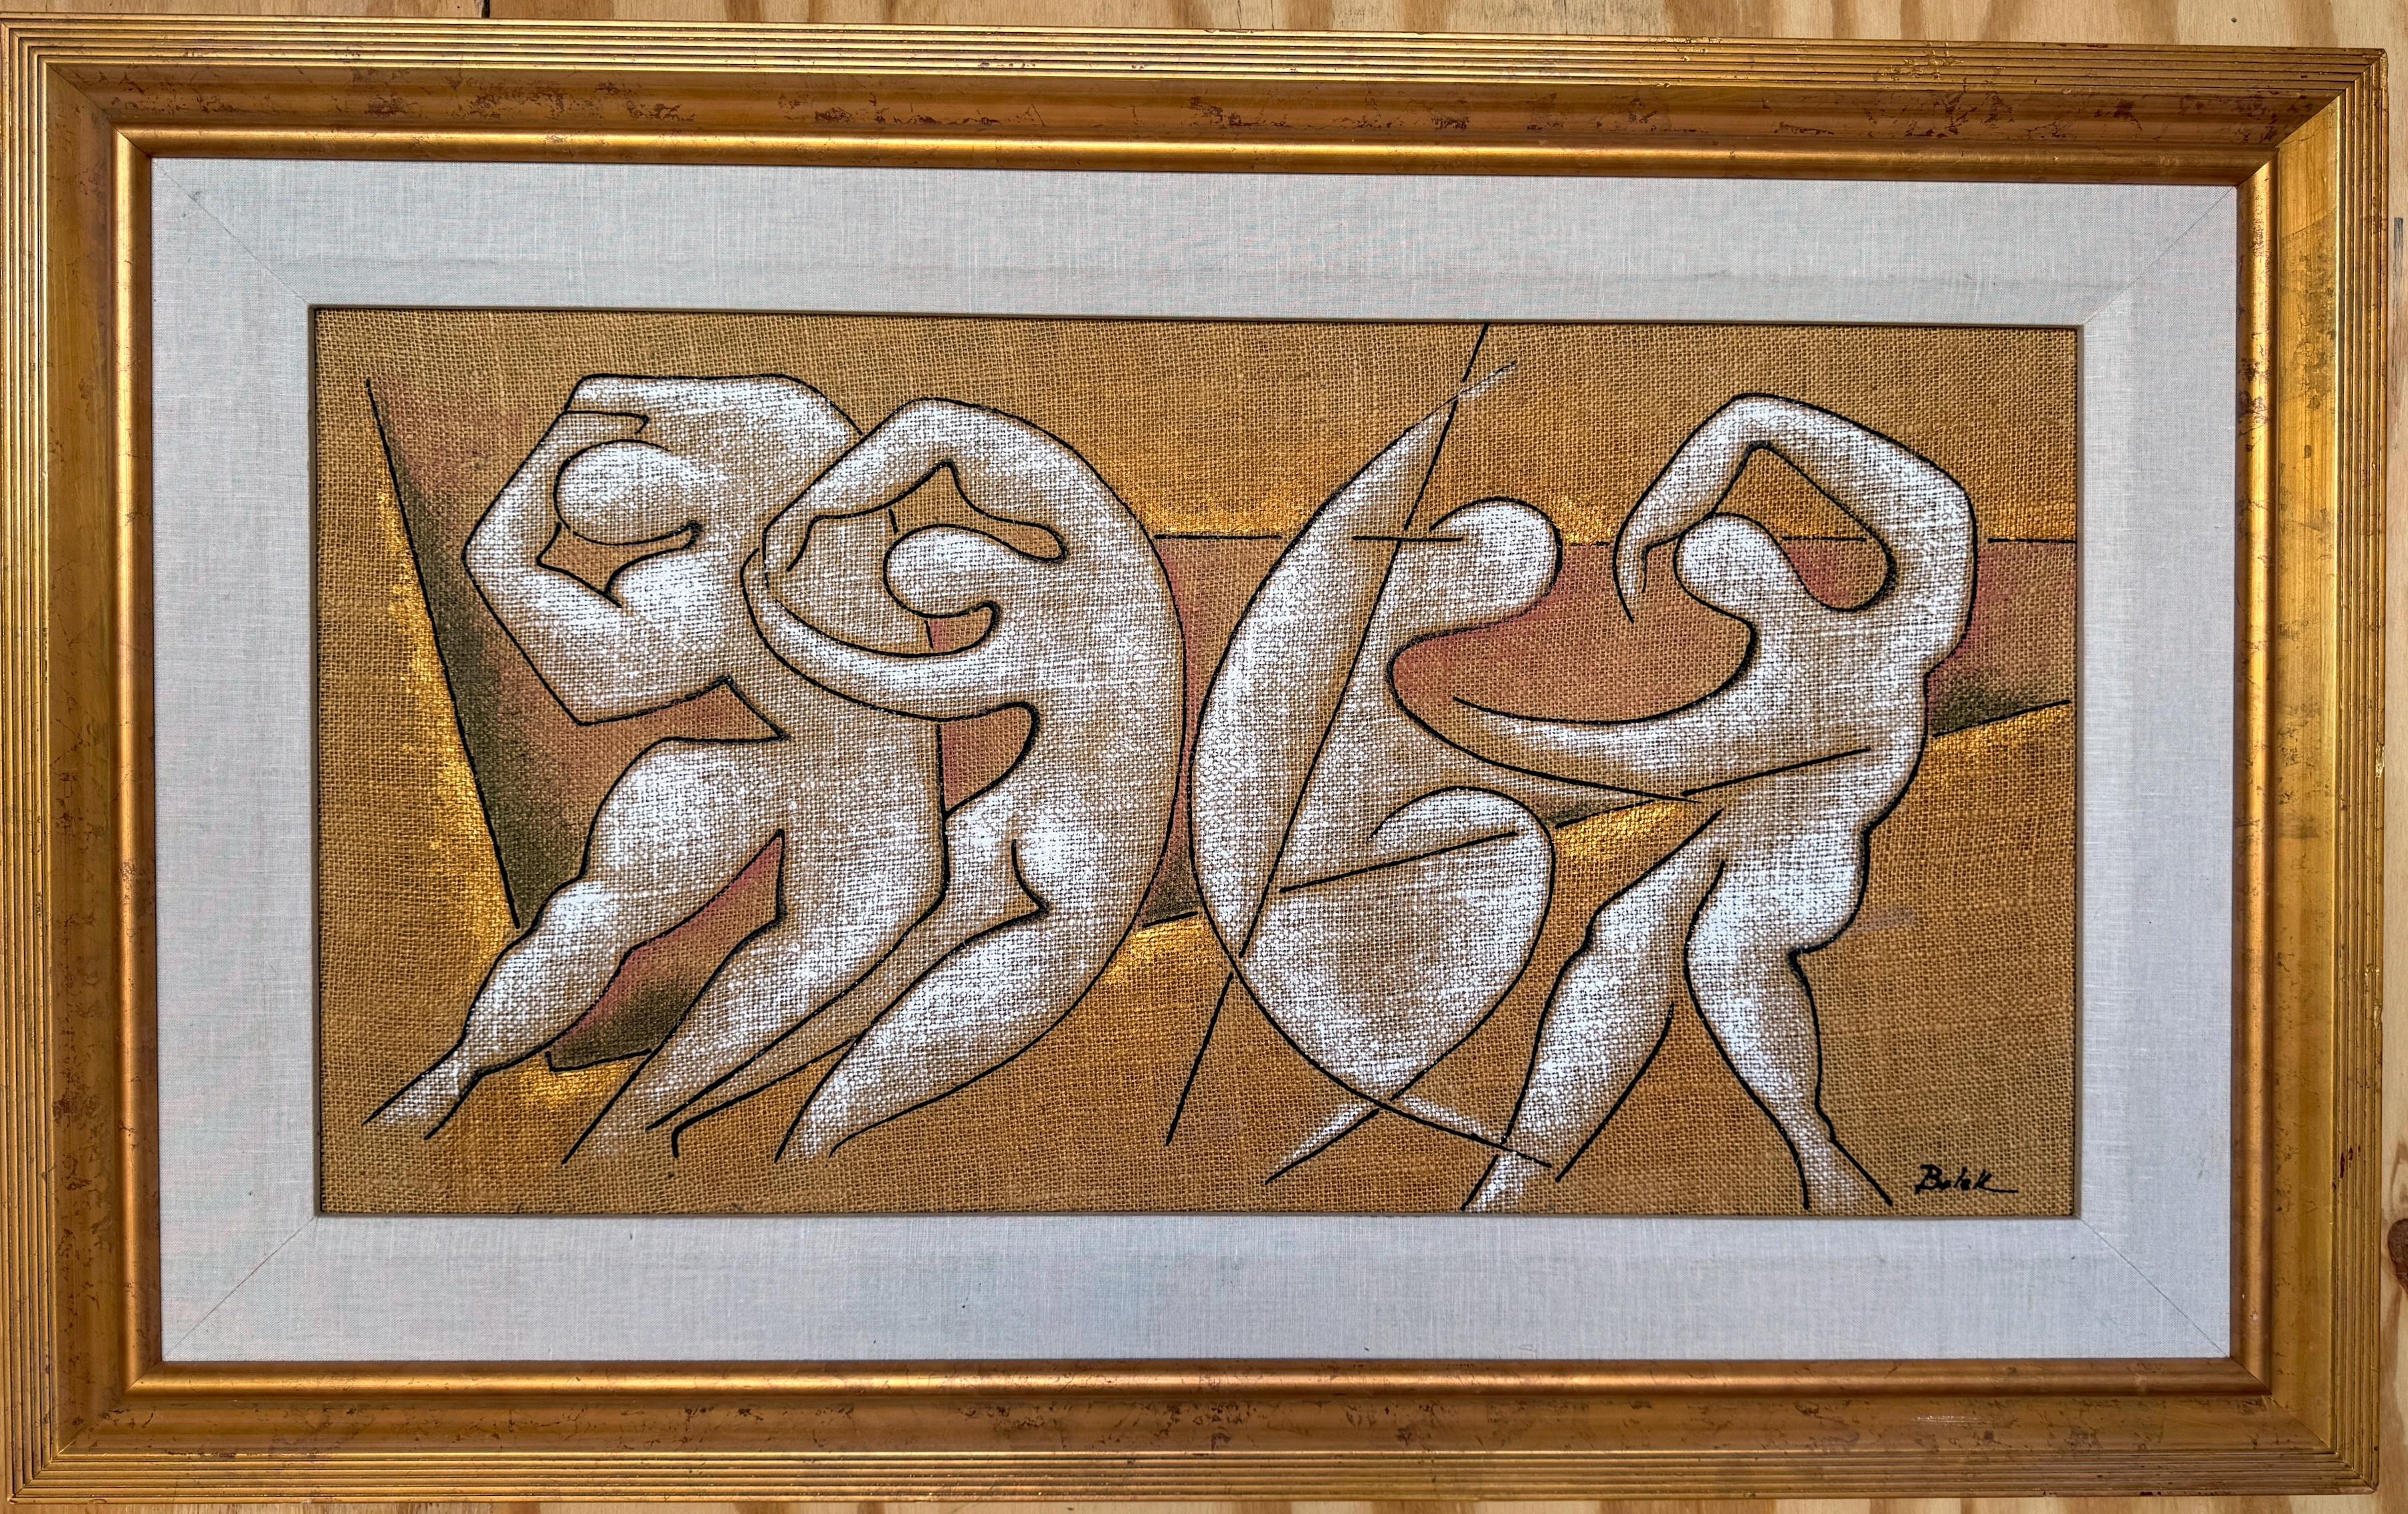 1960s Mod figural Batik on Burlap, signed 'Bolek', Retailed by Harris Strong 

A masterwork of 1960s Mod art with this striking Figural Batik on Burlap, signed 'Bolek',  retailed by Harris Strong. Measuring 33 inches in width and 17.75 inches in